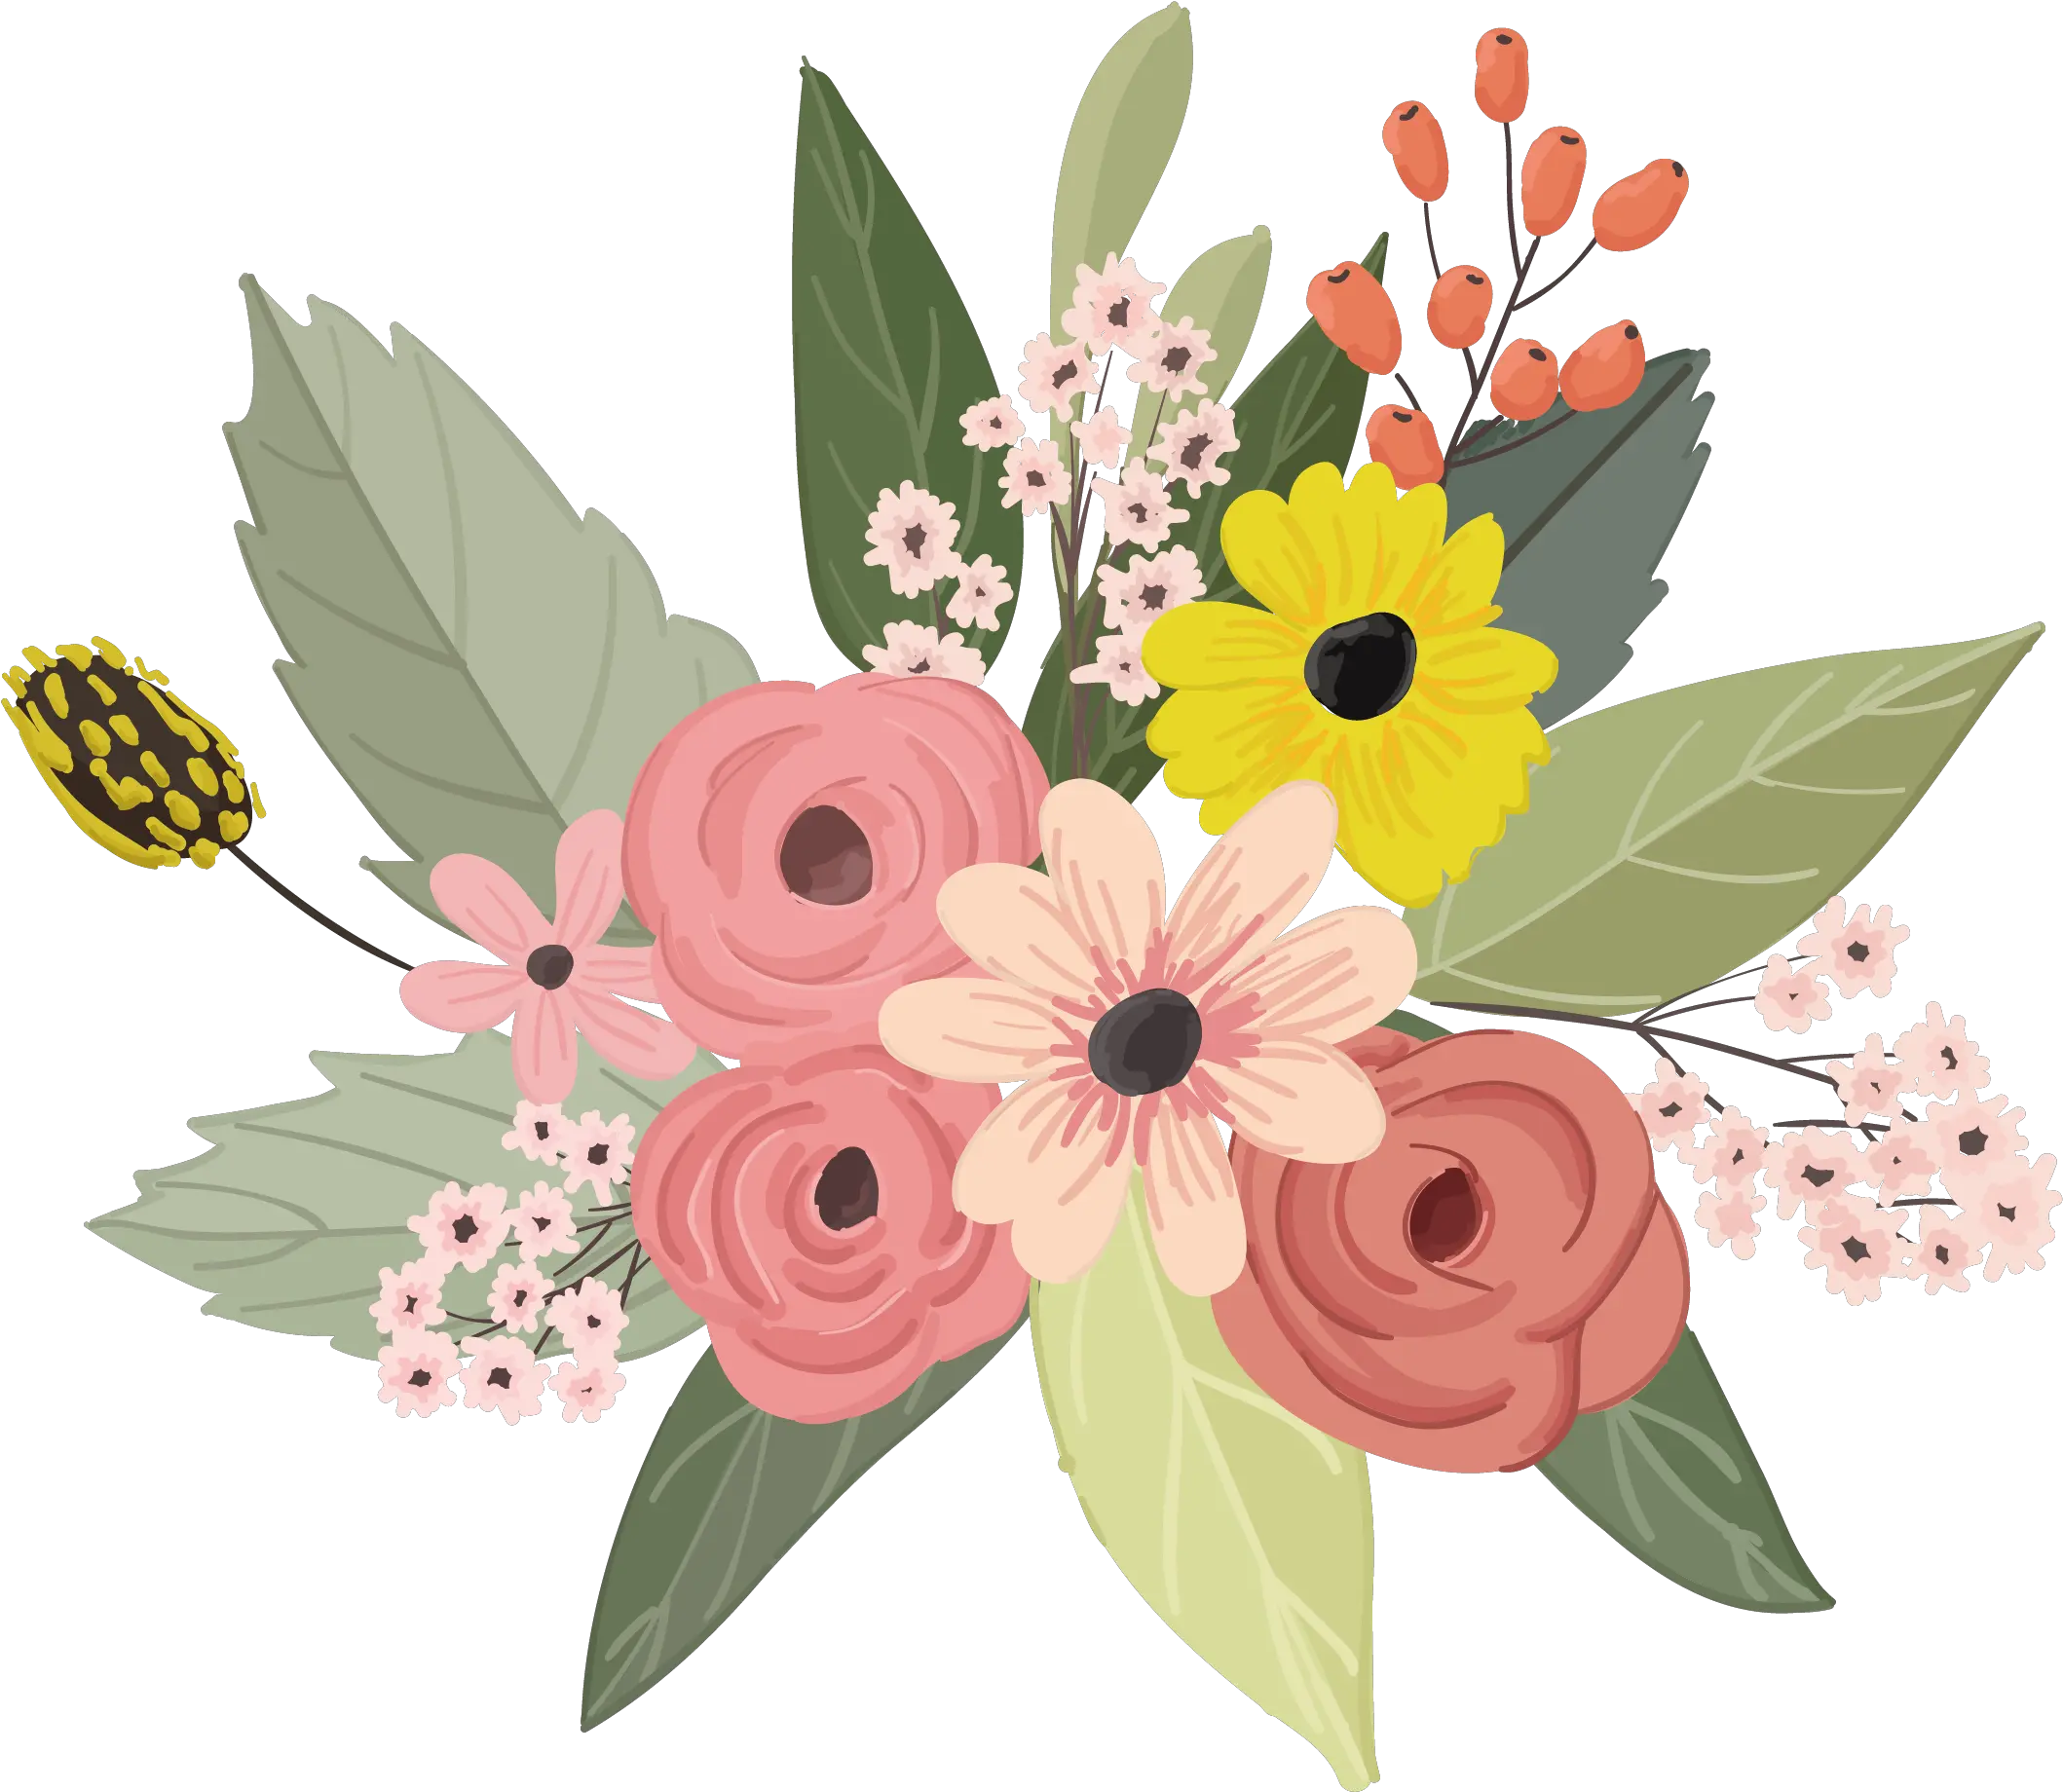 Bouquet Of Flowers Vector Png Flower Vector Png Watercolor Flower Vector Png Bouquet Of Flowers Png